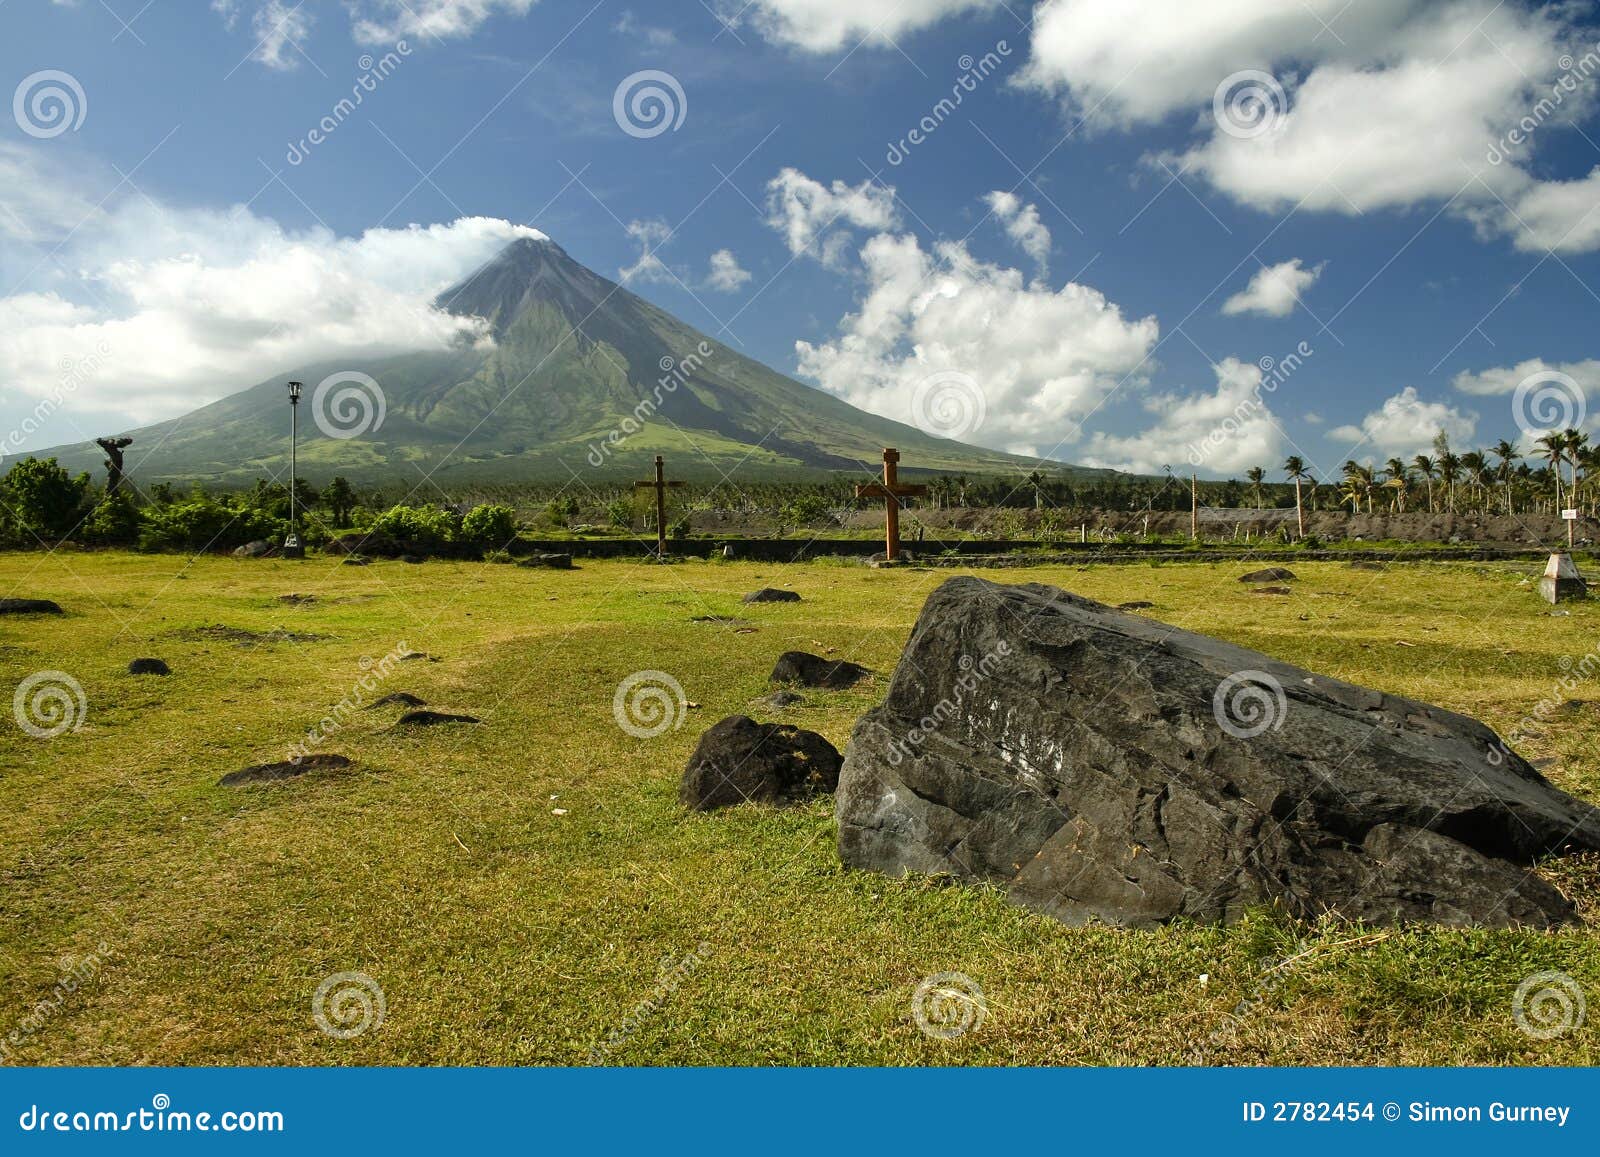 Mt Mayon Volcano Philippines Stock Images by Megapixl